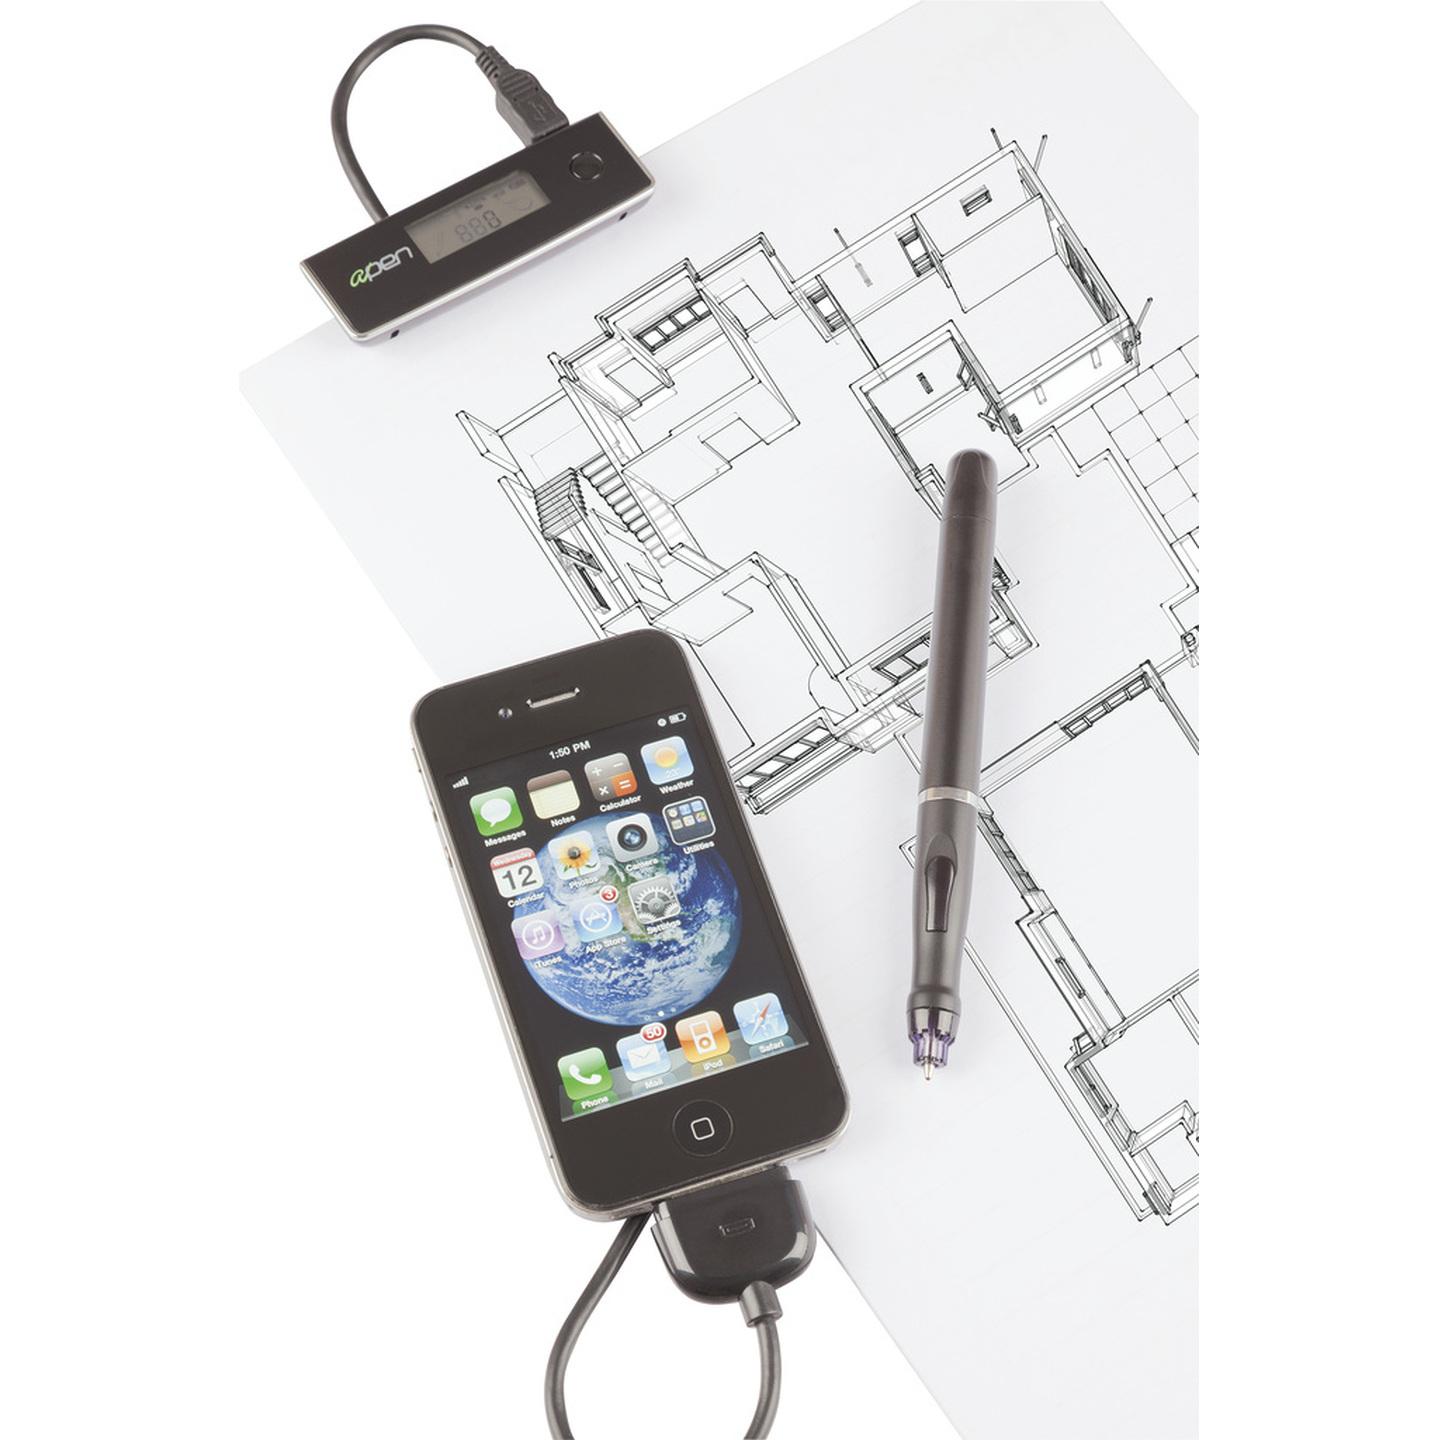 Smart Digital Pen for iPhone and iPad